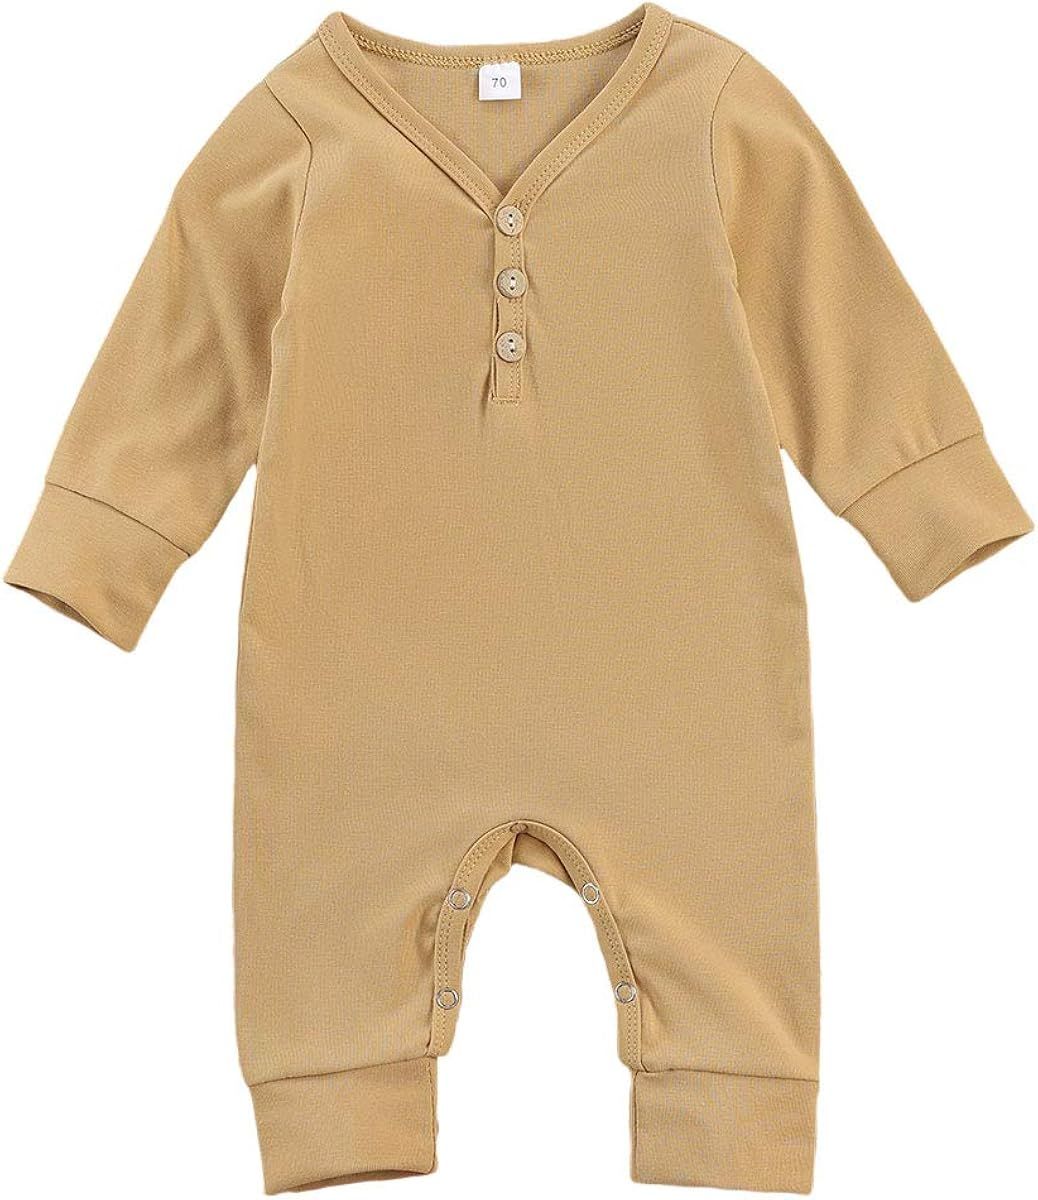 Newborn Kids Baby Boys Cute Solid Color Romper Jumpsuit Top Outfits Clothes | Amazon (US)